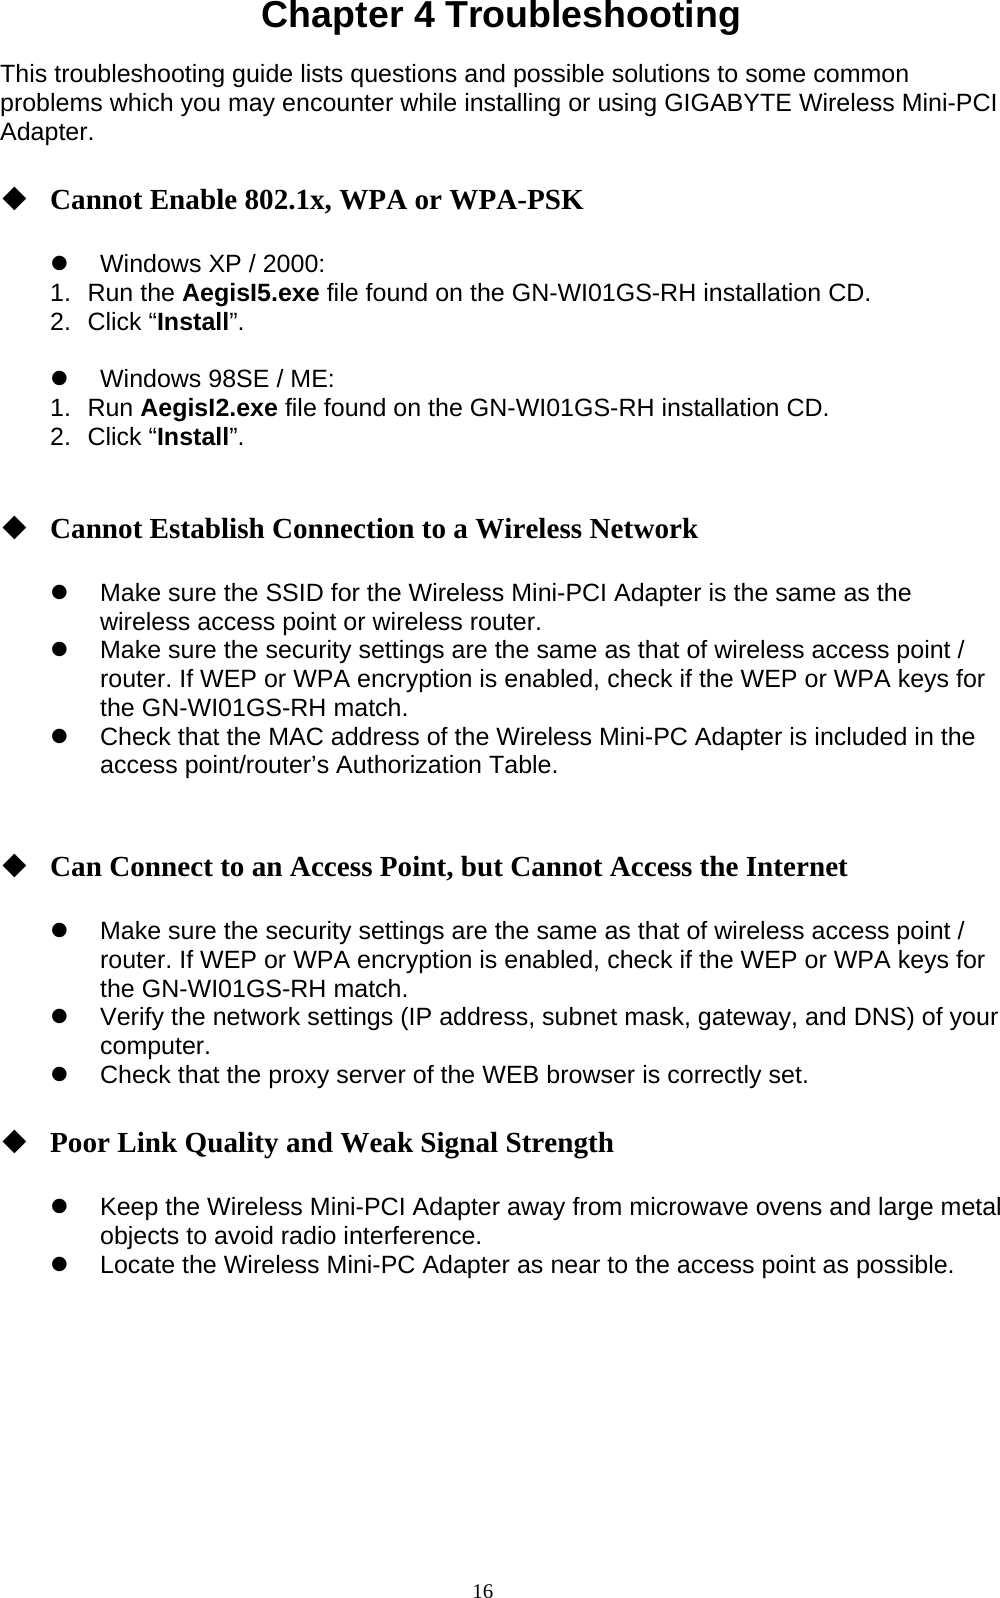 16  Chapter 4 Troubleshooting  This troubleshooting guide lists questions and possible solutions to some common problems which you may encounter while installing or using GIGABYTE Wireless Mini-PCI Adapter.   Cannot Enable 802.1x, WPA or WPA-PSK  z  Windows XP / 2000: 1. Run the AegisI5.exe file found on the GN-WI01GS-RH installation CD. 2. Click “Install”.  z  Windows 98SE / ME: 1. Run AegisI2.exe file found on the GN-WI01GS-RH installation CD. 2. Click “Install”.    Cannot Establish Connection to a Wireless Network  z  Make sure the SSID for the Wireless Mini-PCI Adapter is the same as the wireless access point or wireless router. z  Make sure the security settings are the same as that of wireless access point / router. If WEP or WPA encryption is enabled, check if the WEP or WPA keys for the GN-WI01GS-RH match.   z  Check that the MAC address of the Wireless Mini-PC Adapter is included in the access point/router’s Authorization Table.      Can Connect to an Access Point, but Cannot Access the Internet  z  Make sure the security settings are the same as that of wireless access point / router. If WEP or WPA encryption is enabled, check if the WEP or WPA keys for the GN-WI01GS-RH match.   z  Verify the network settings (IP address, subnet mask, gateway, and DNS) of your computer. z  Check that the proxy server of the WEB browser is correctly set.   Poor Link Quality and Weak Signal Strength  z  Keep the Wireless Mini-PCI Adapter away from microwave ovens and large metal objects to avoid radio interference. z  Locate the Wireless Mini-PC Adapter as near to the access point as possible.     